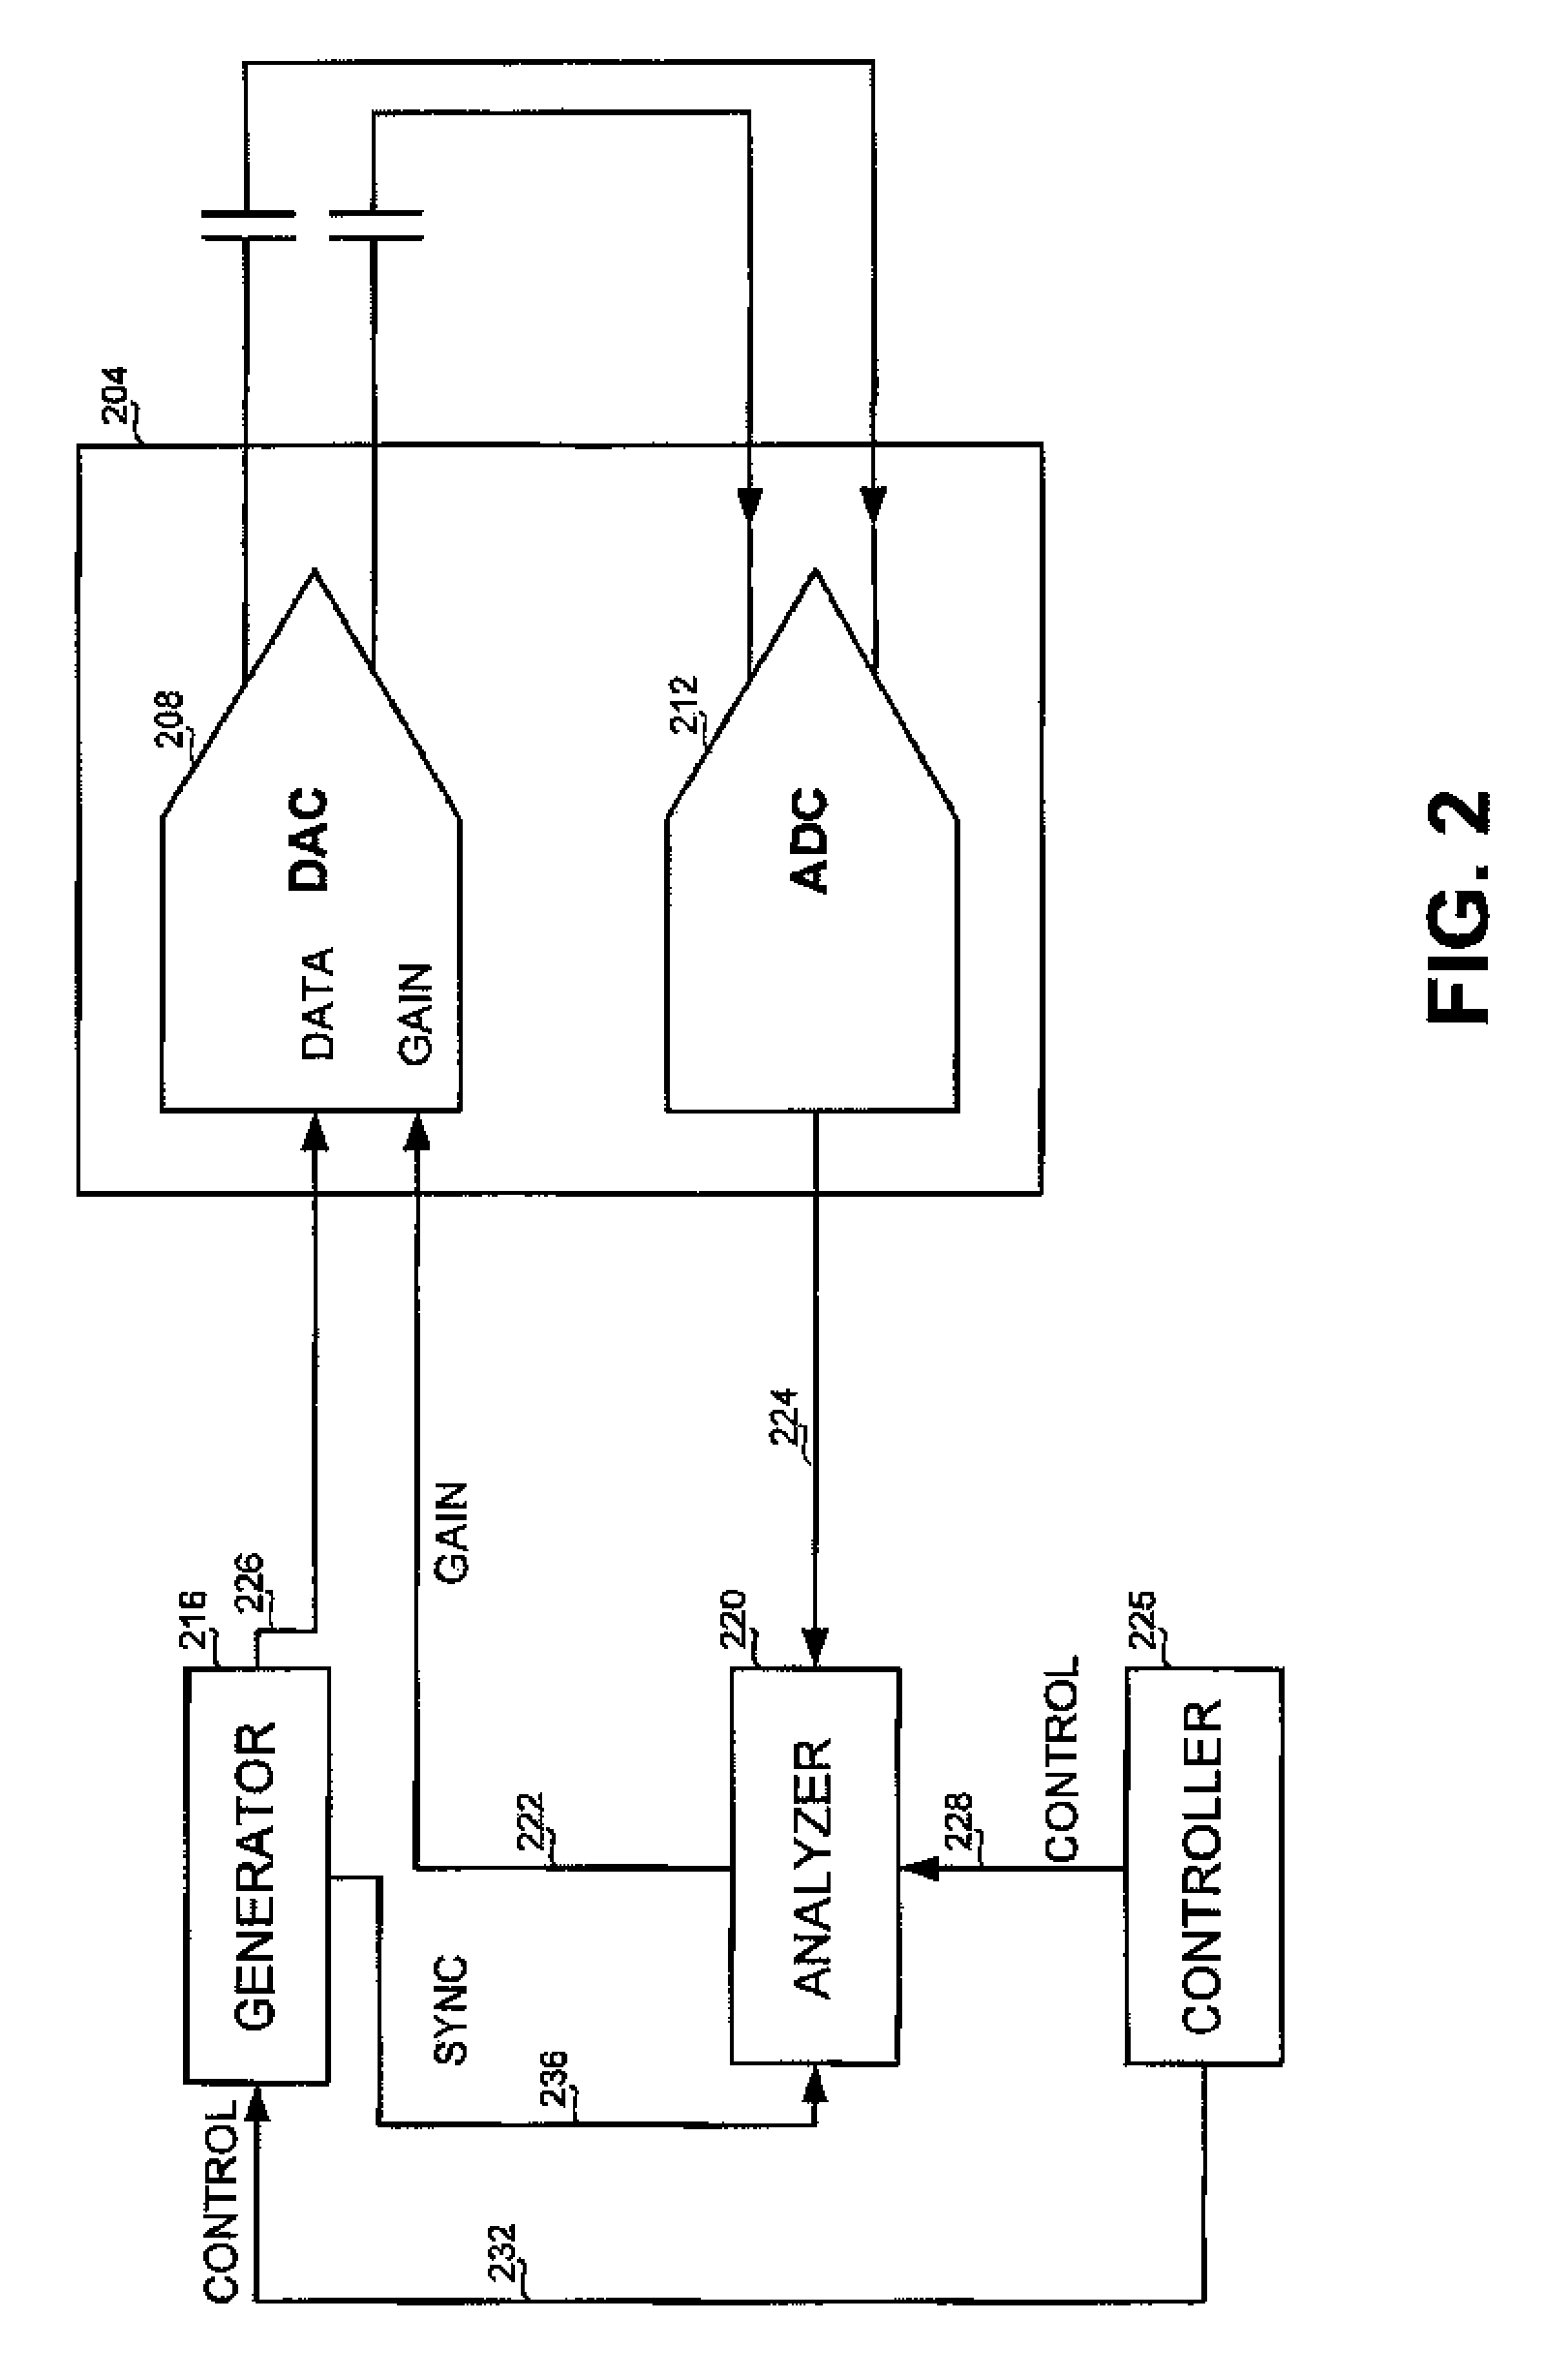 Method and apparatus for testing data converters